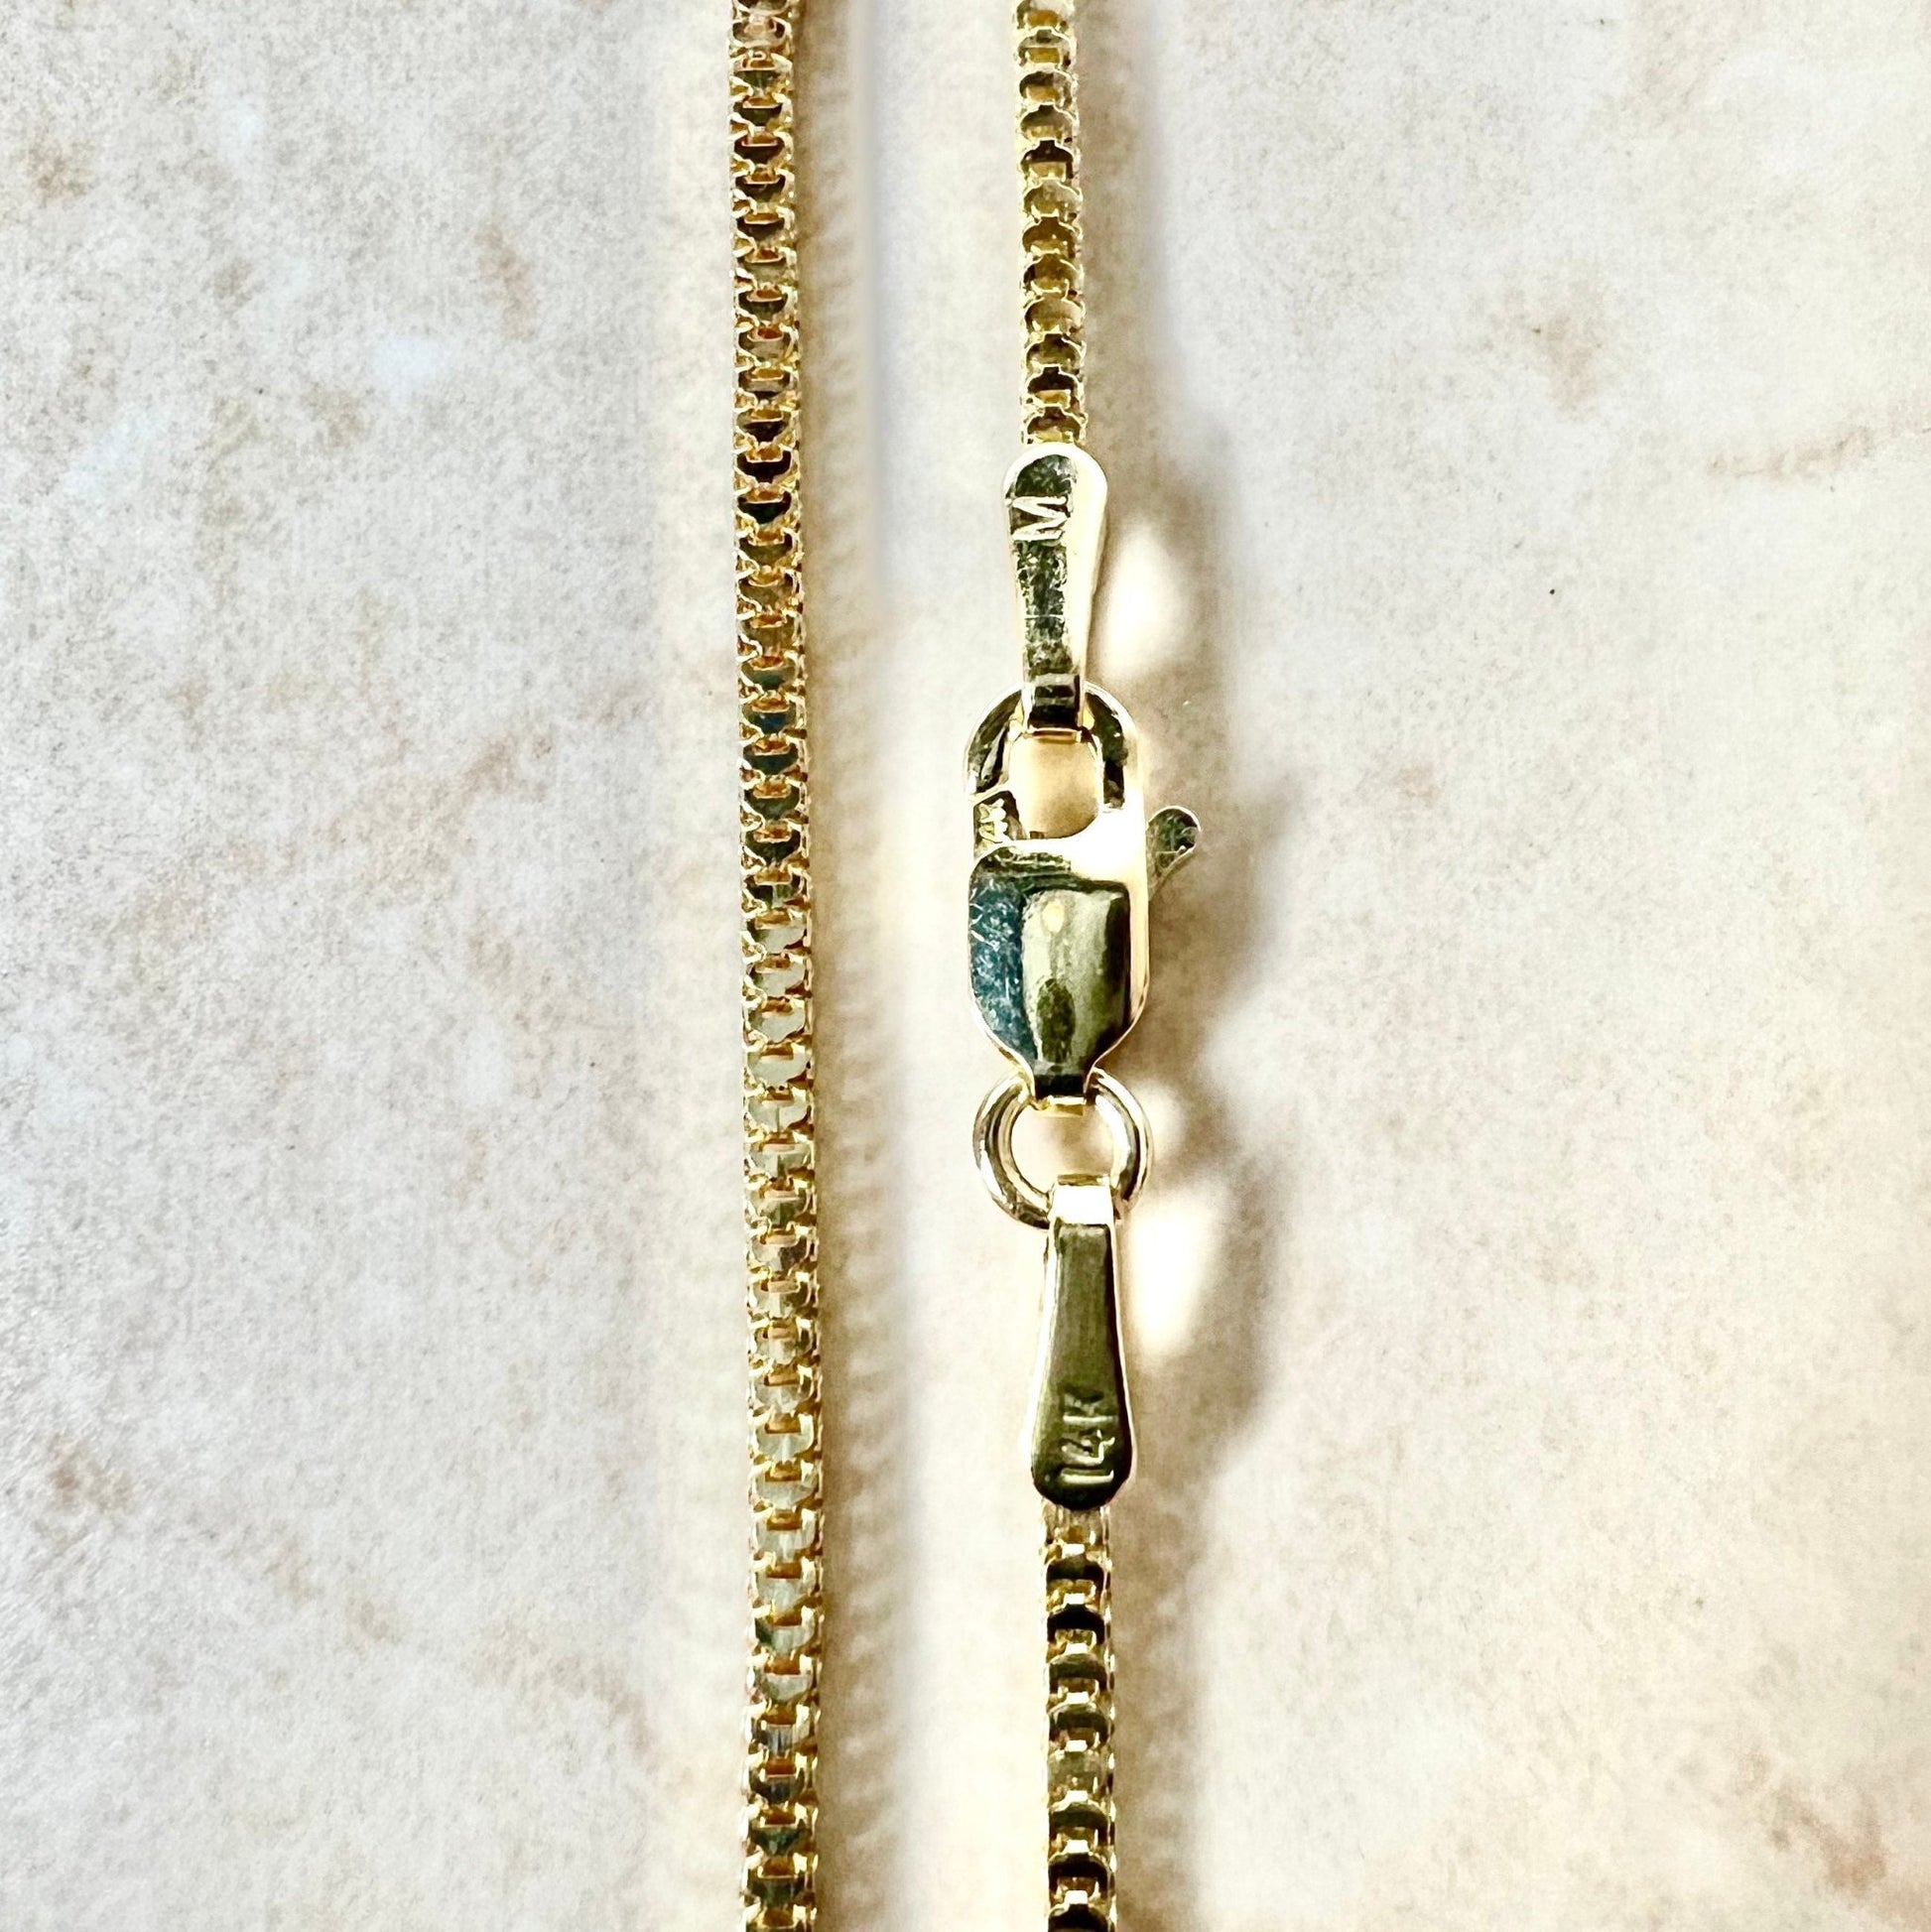 14K Yellow Gold Box Chain - 19” Gold Chain - Yellow Gold Necklace - Specialty Gold Chain Necklace - Best Gifts For Her - 14K Gold Chain